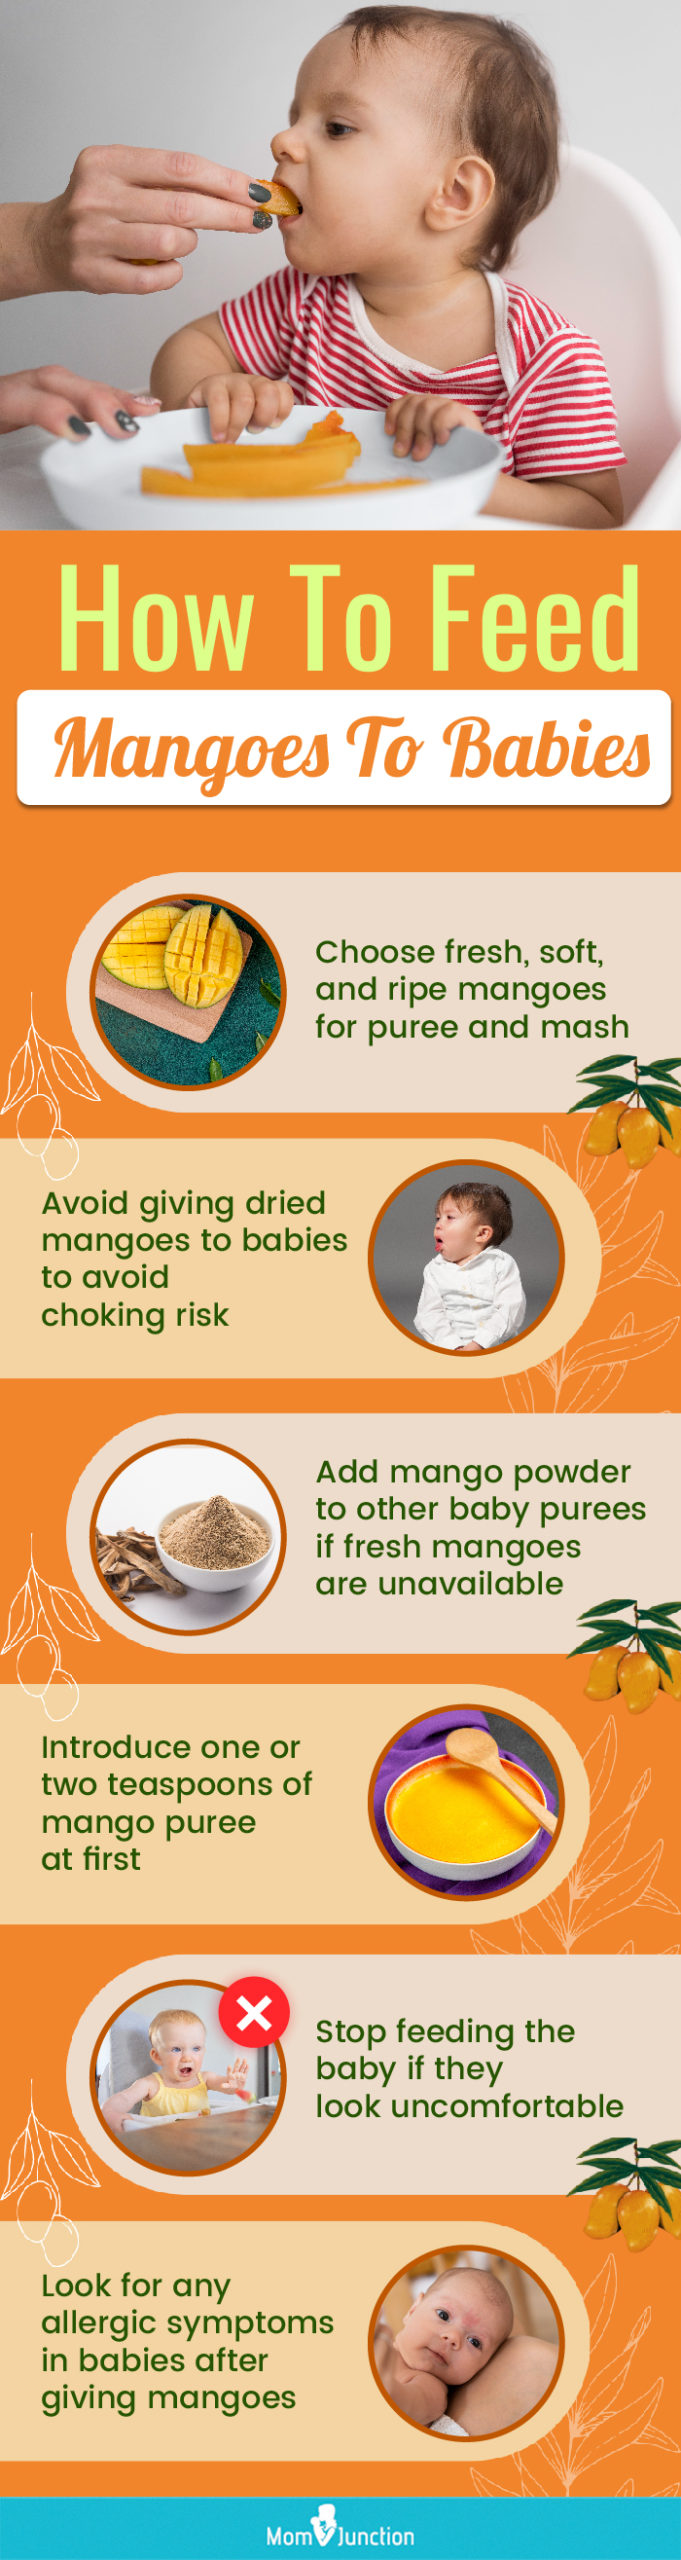 how to feed mangoes to babies (infographic)